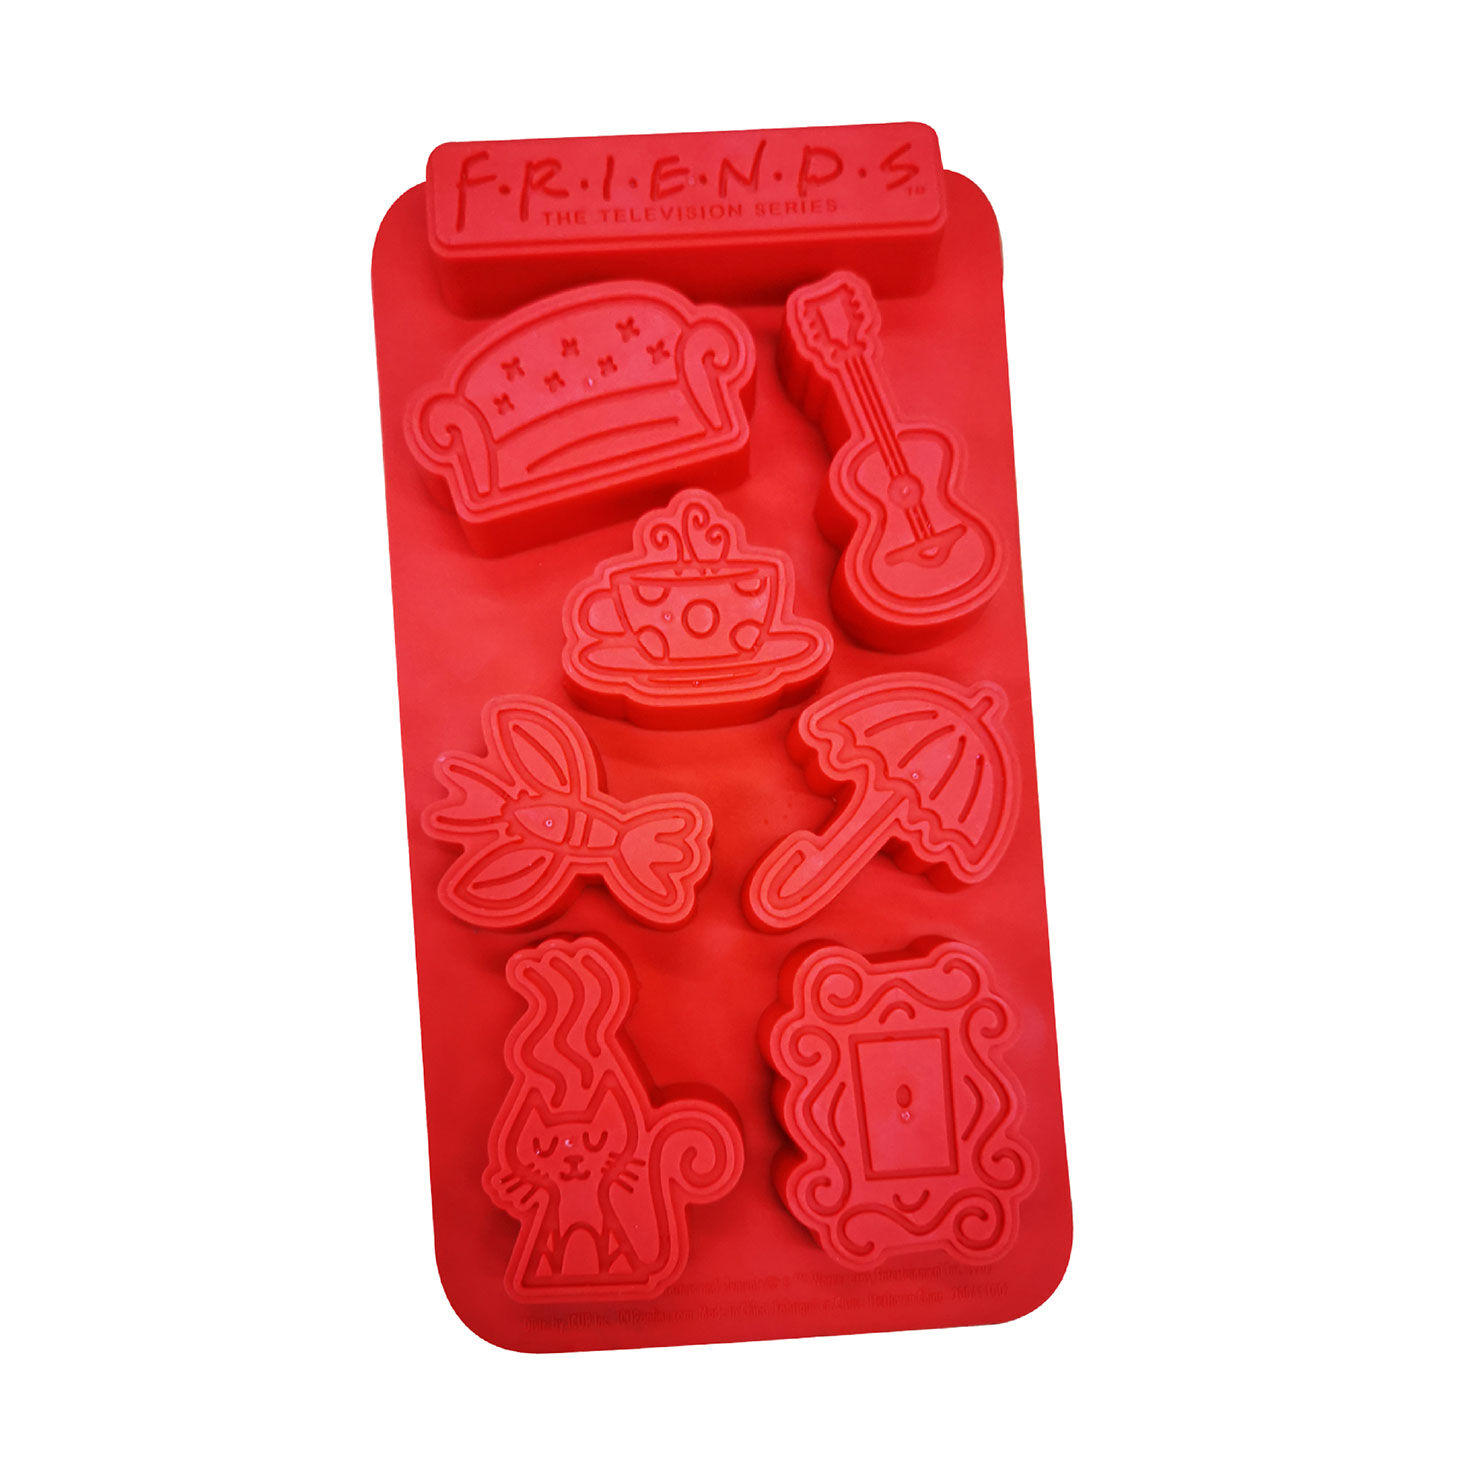 https://www.hallmark.com/dw/image/v2/AALB_PRD/on/demandware.static/-/Sites-hallmark-master/default/dwbfa406cf/images/finished-goods/products/18772/FriendsThemed-Silicone-Tray-for-Shaped-Ice-Cubes_18772_01.jpg?sfrm=jpg